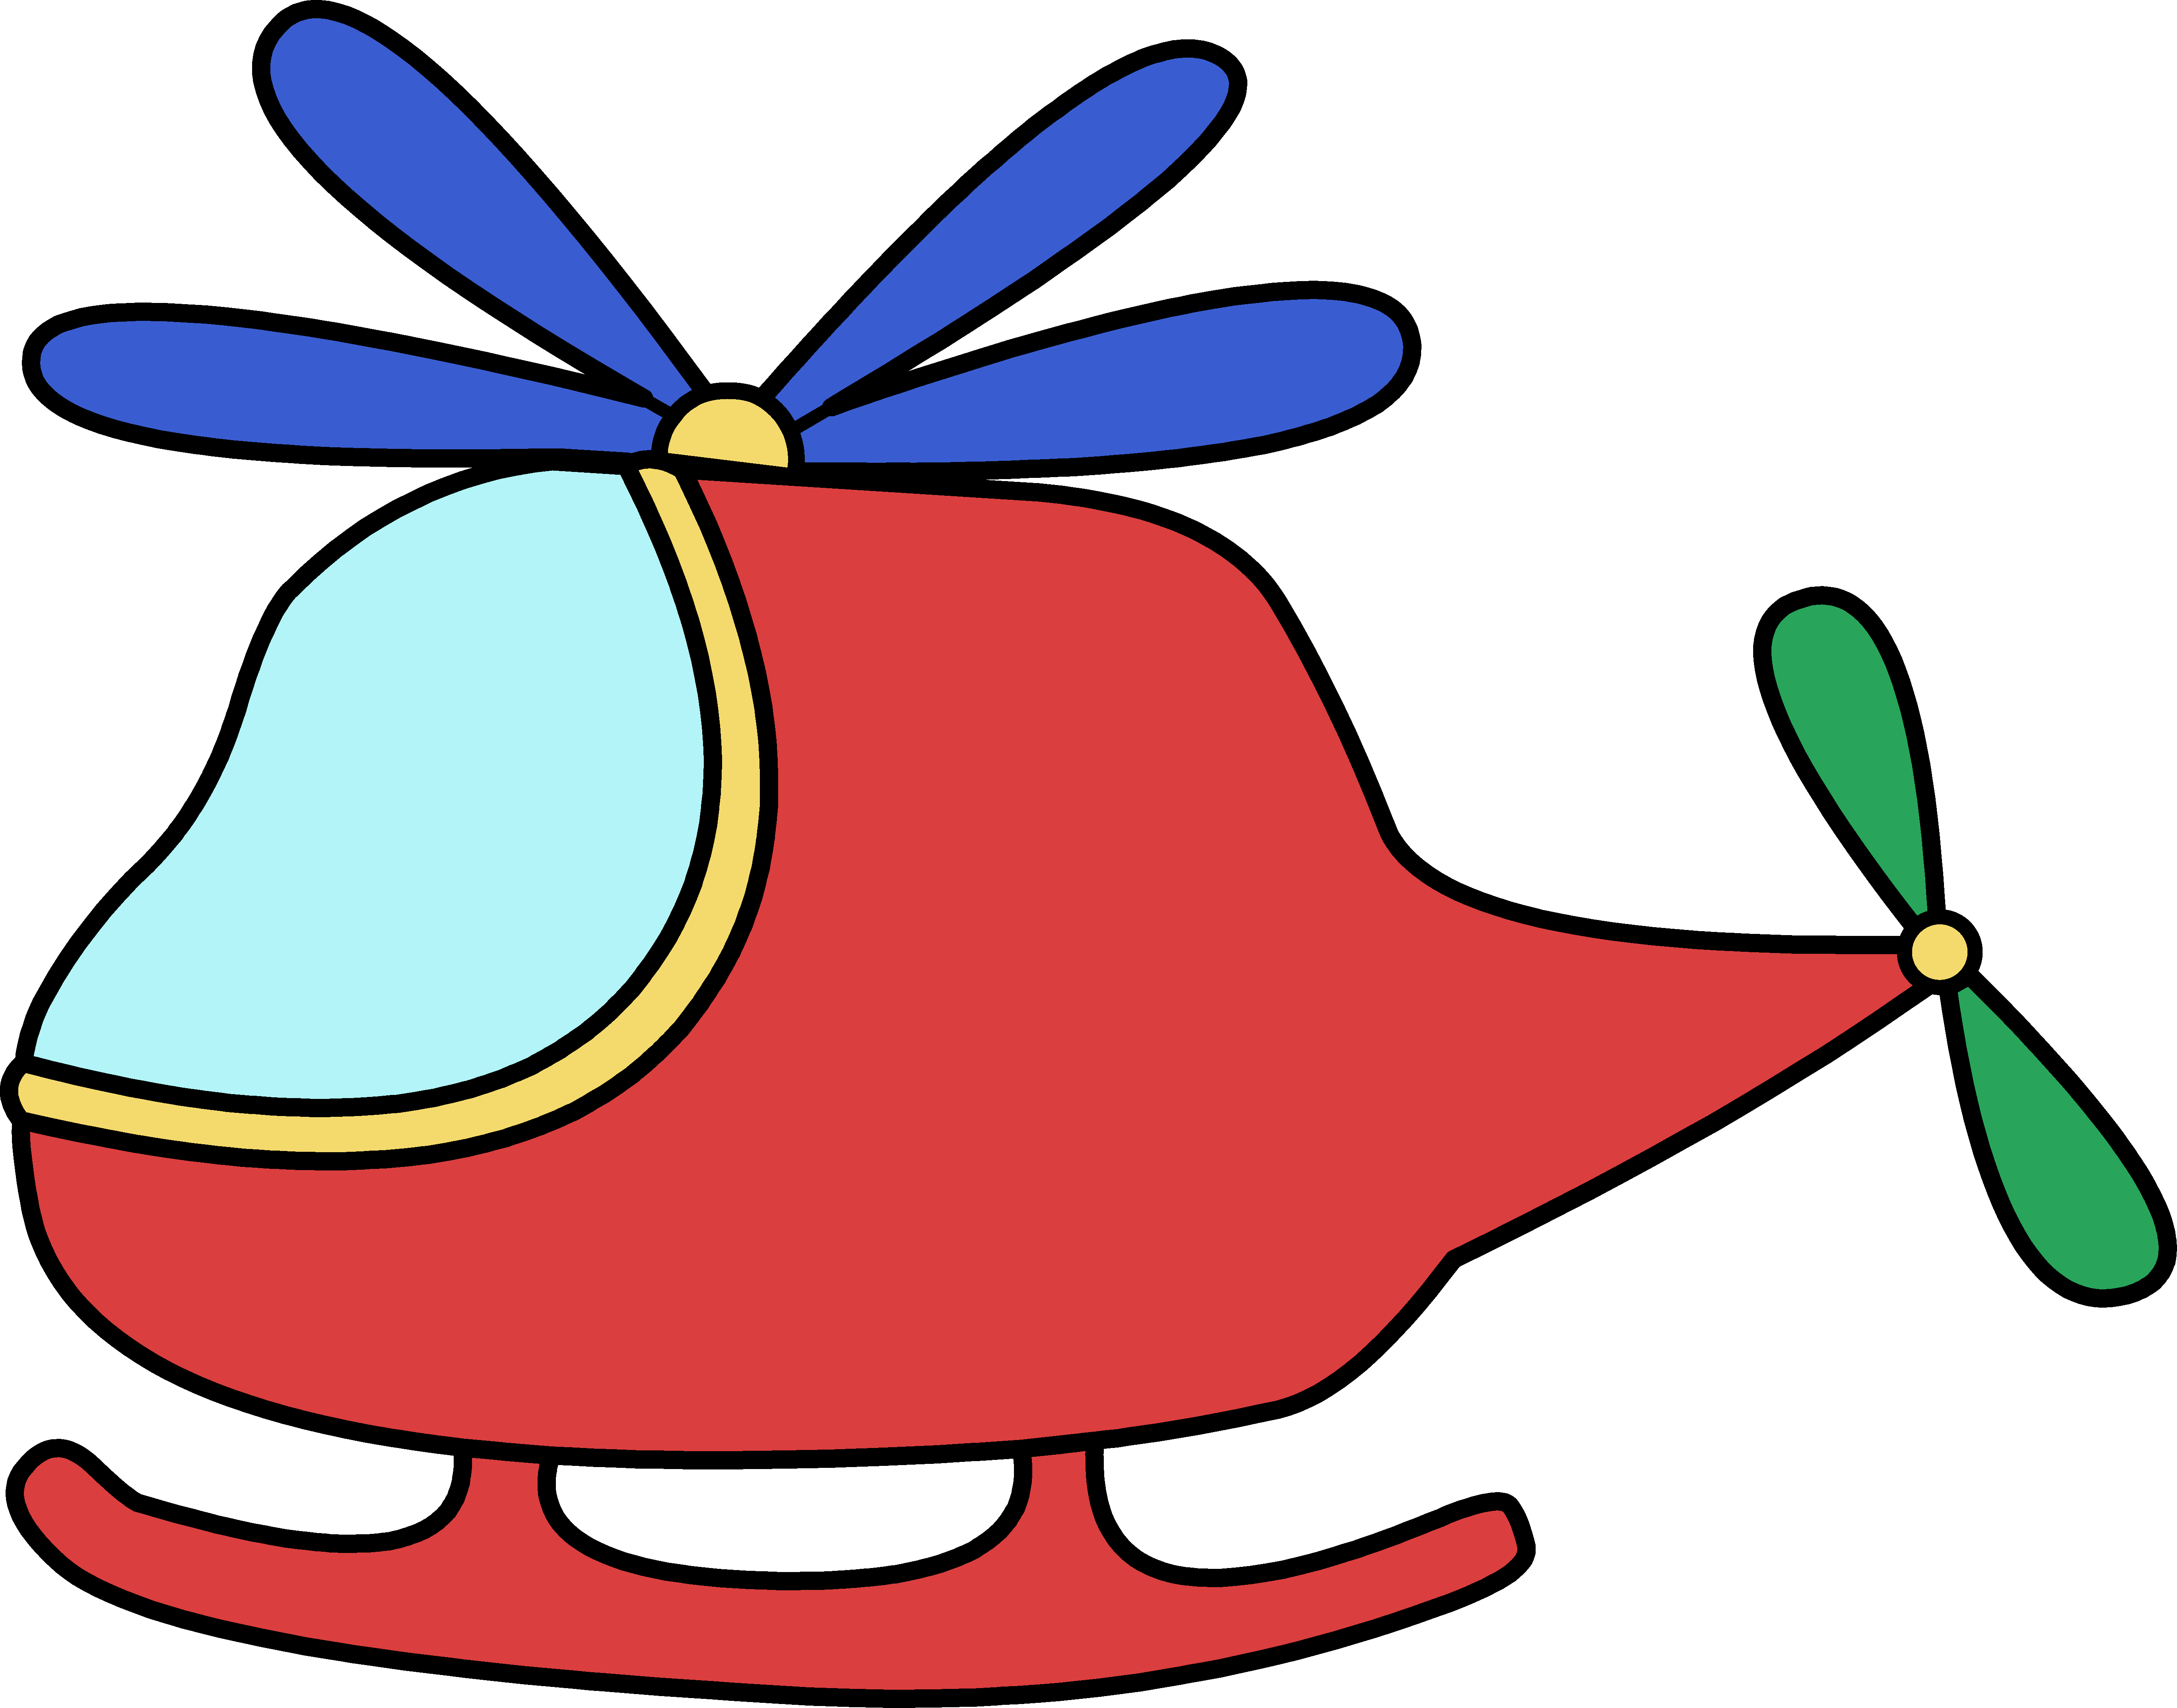 Helicopter clipart for kids